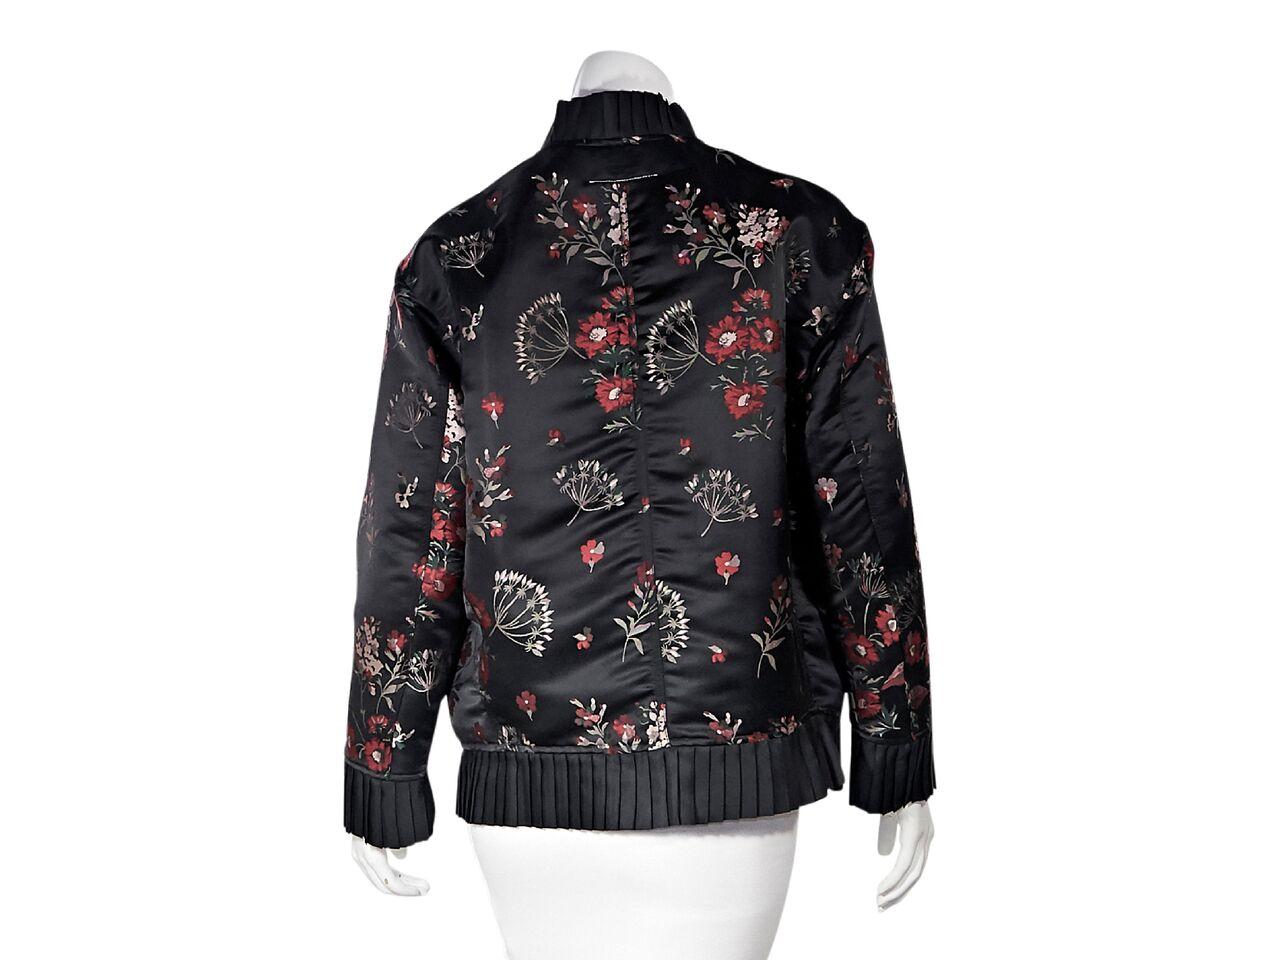 Product details:  Black and red floral bomber jacket by MM6 Maison Margiela.  Stand ruffle collar.  Long sleeves.  Ruffled cuffs.  Zip-front closure.  Waist snap flap pockets.  Ruffled hem.  28